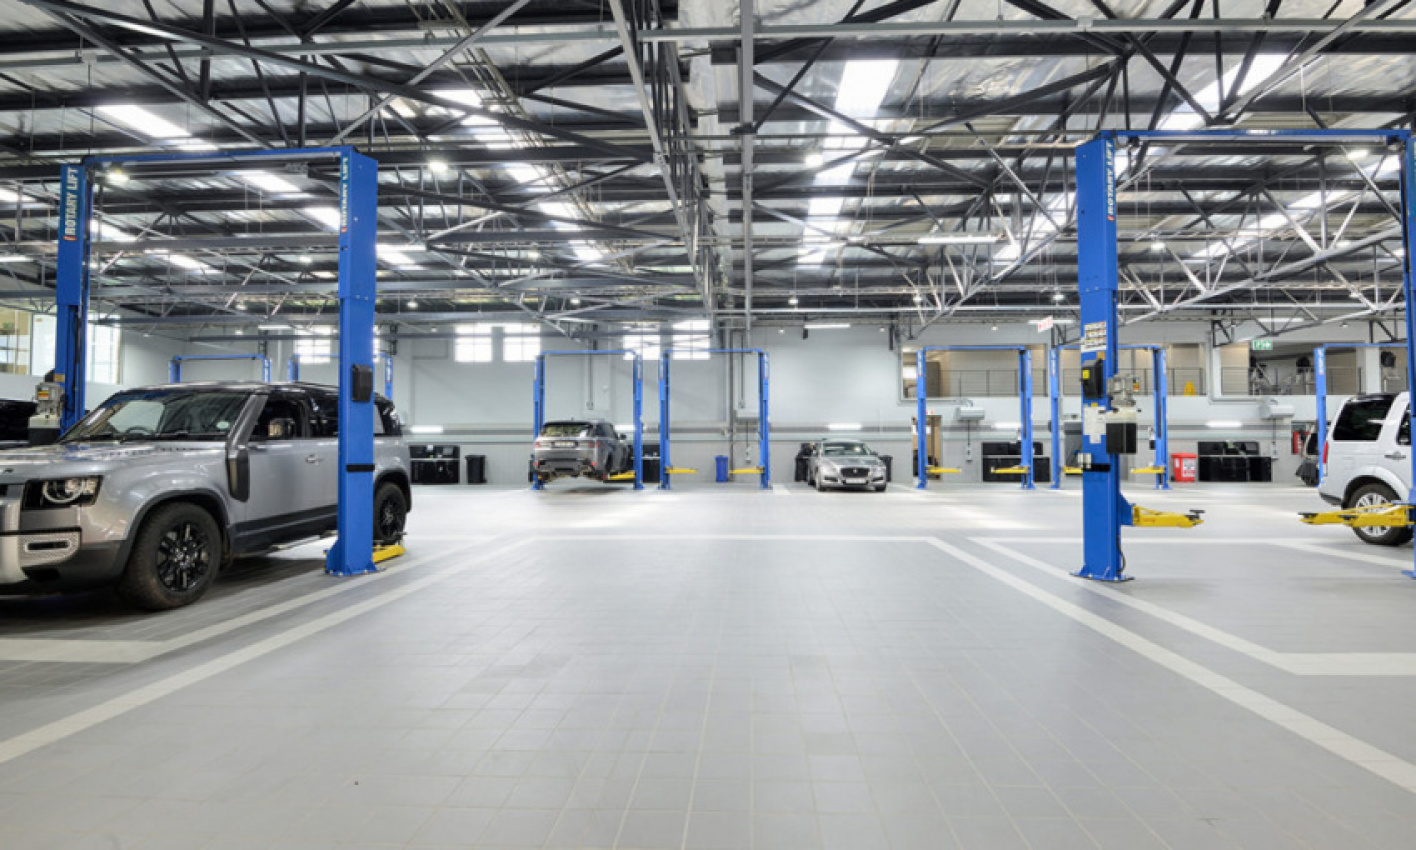 autos, cars, industry news, jaguar, land rover, bryanston, dealership, industry news, jaguar-land rover, range rover, jaguar and land rover bryanston dealership reopens after renovations